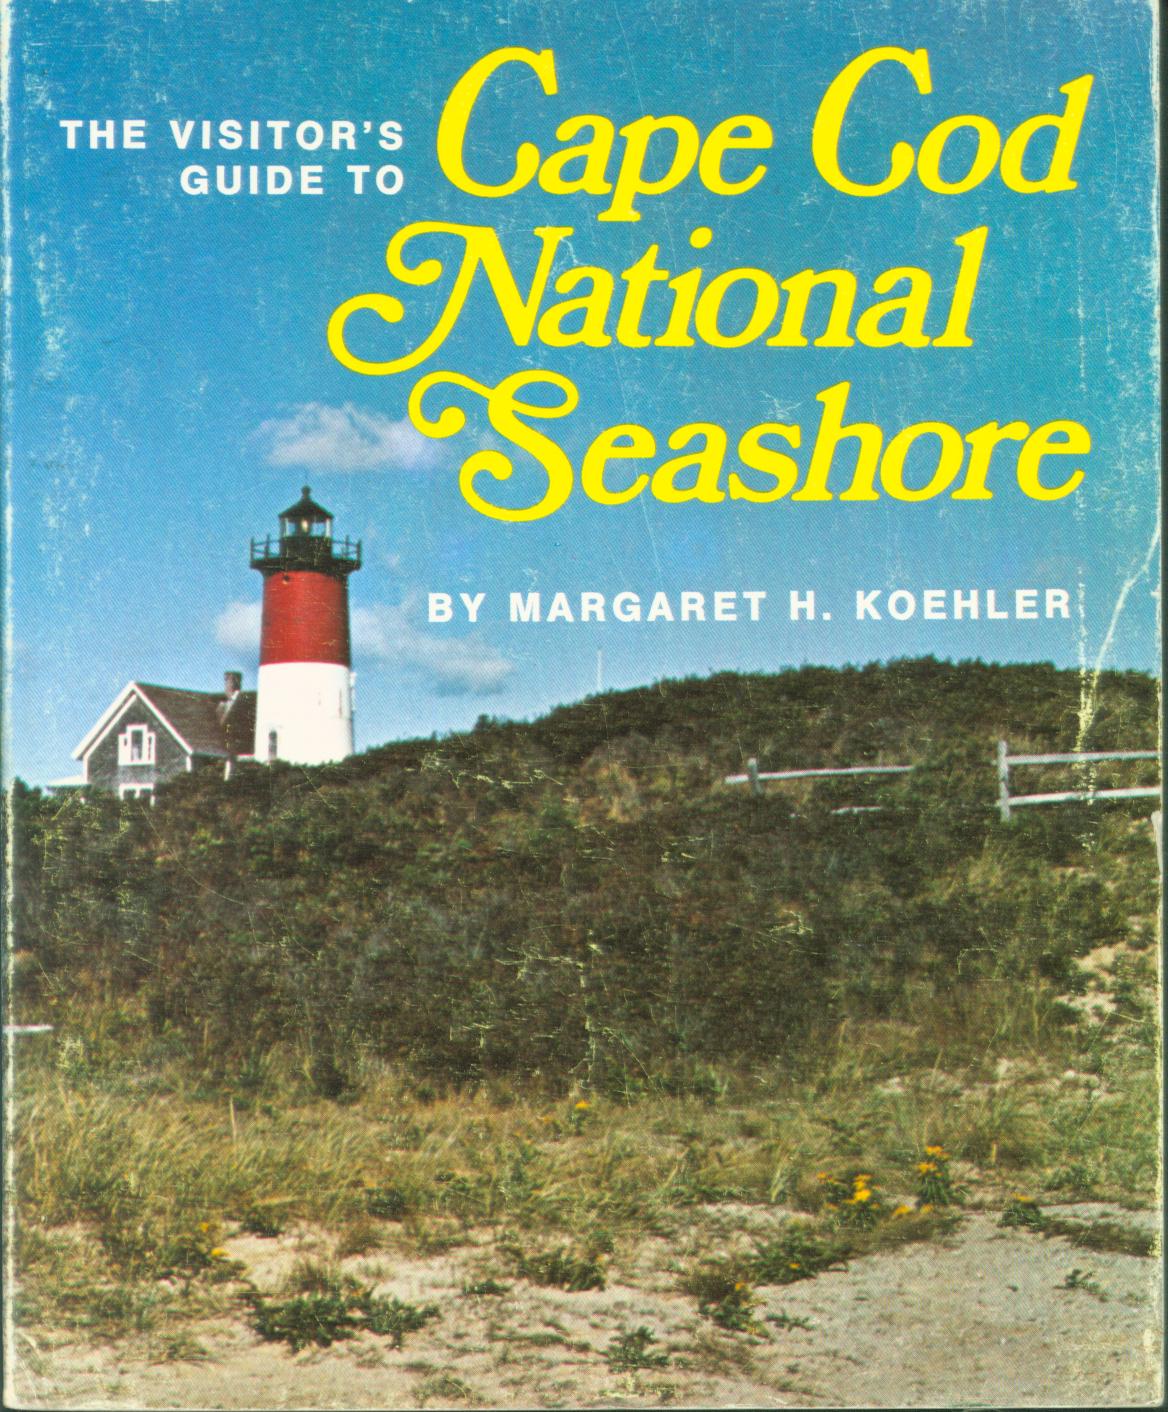 THE VISITOR'S GUIDE TO CAPE COD NATIONAL SEASHORE